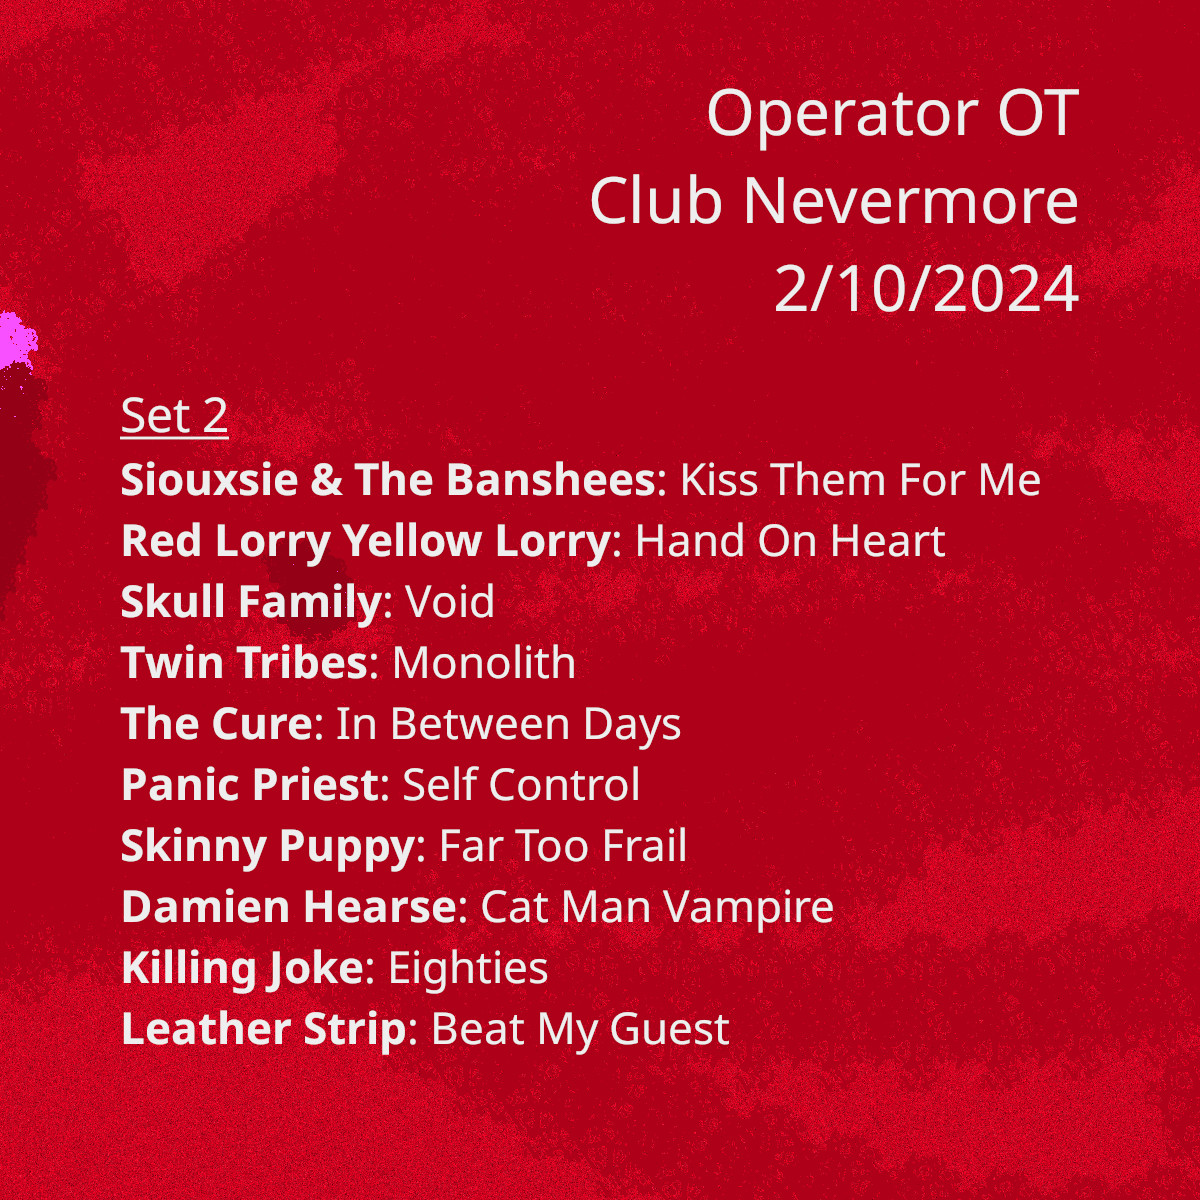 The set list from Operator OT&rsquo;s second set at Club Nevermore on February 10, 2024. The set list is in the text below.